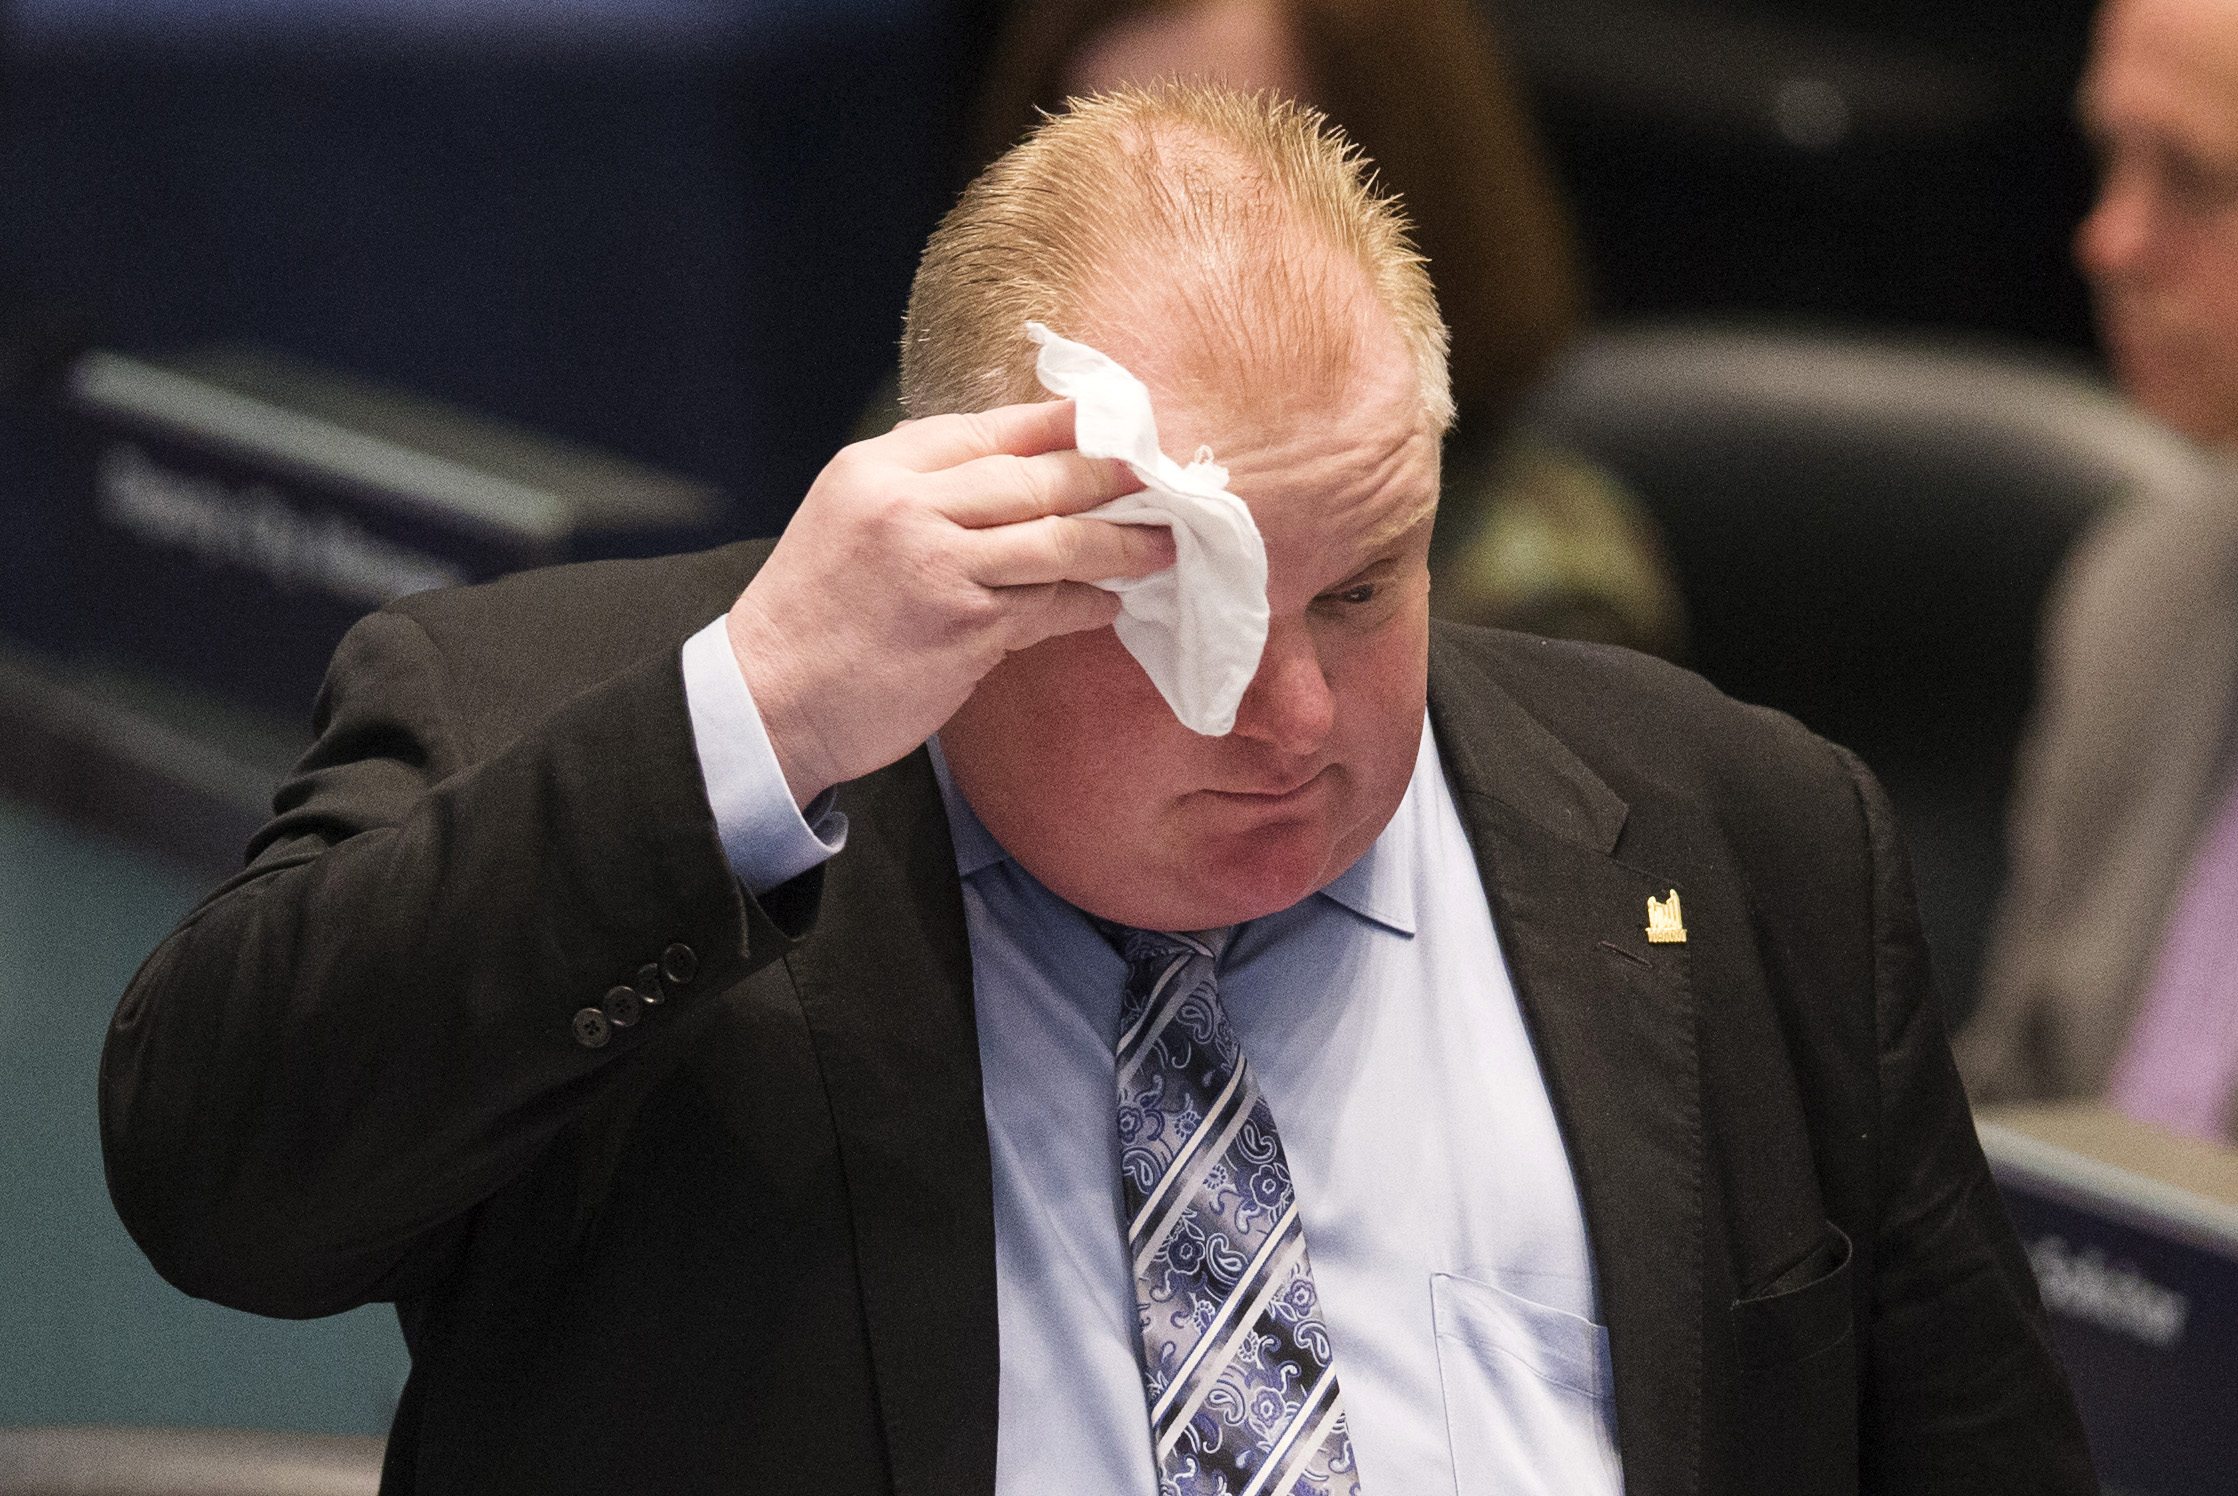 Mayor Rob Ford at City Hall in Toronto on Wednesday. Photo: Reuters